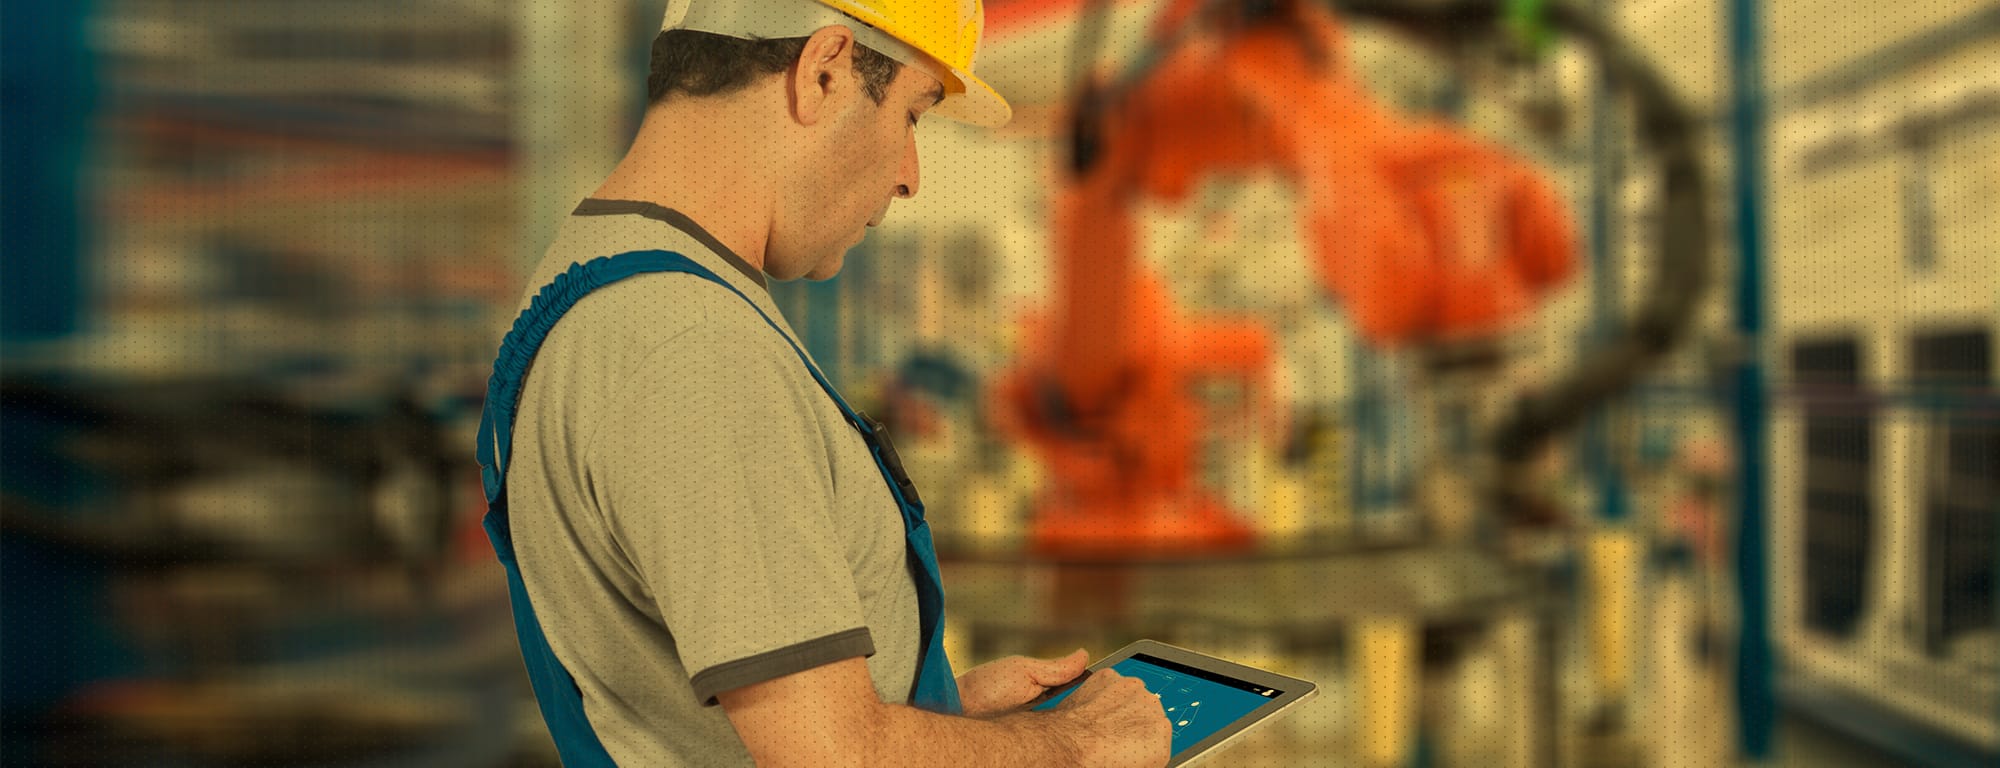 Man with yellow hard hat working in manufacturing plant